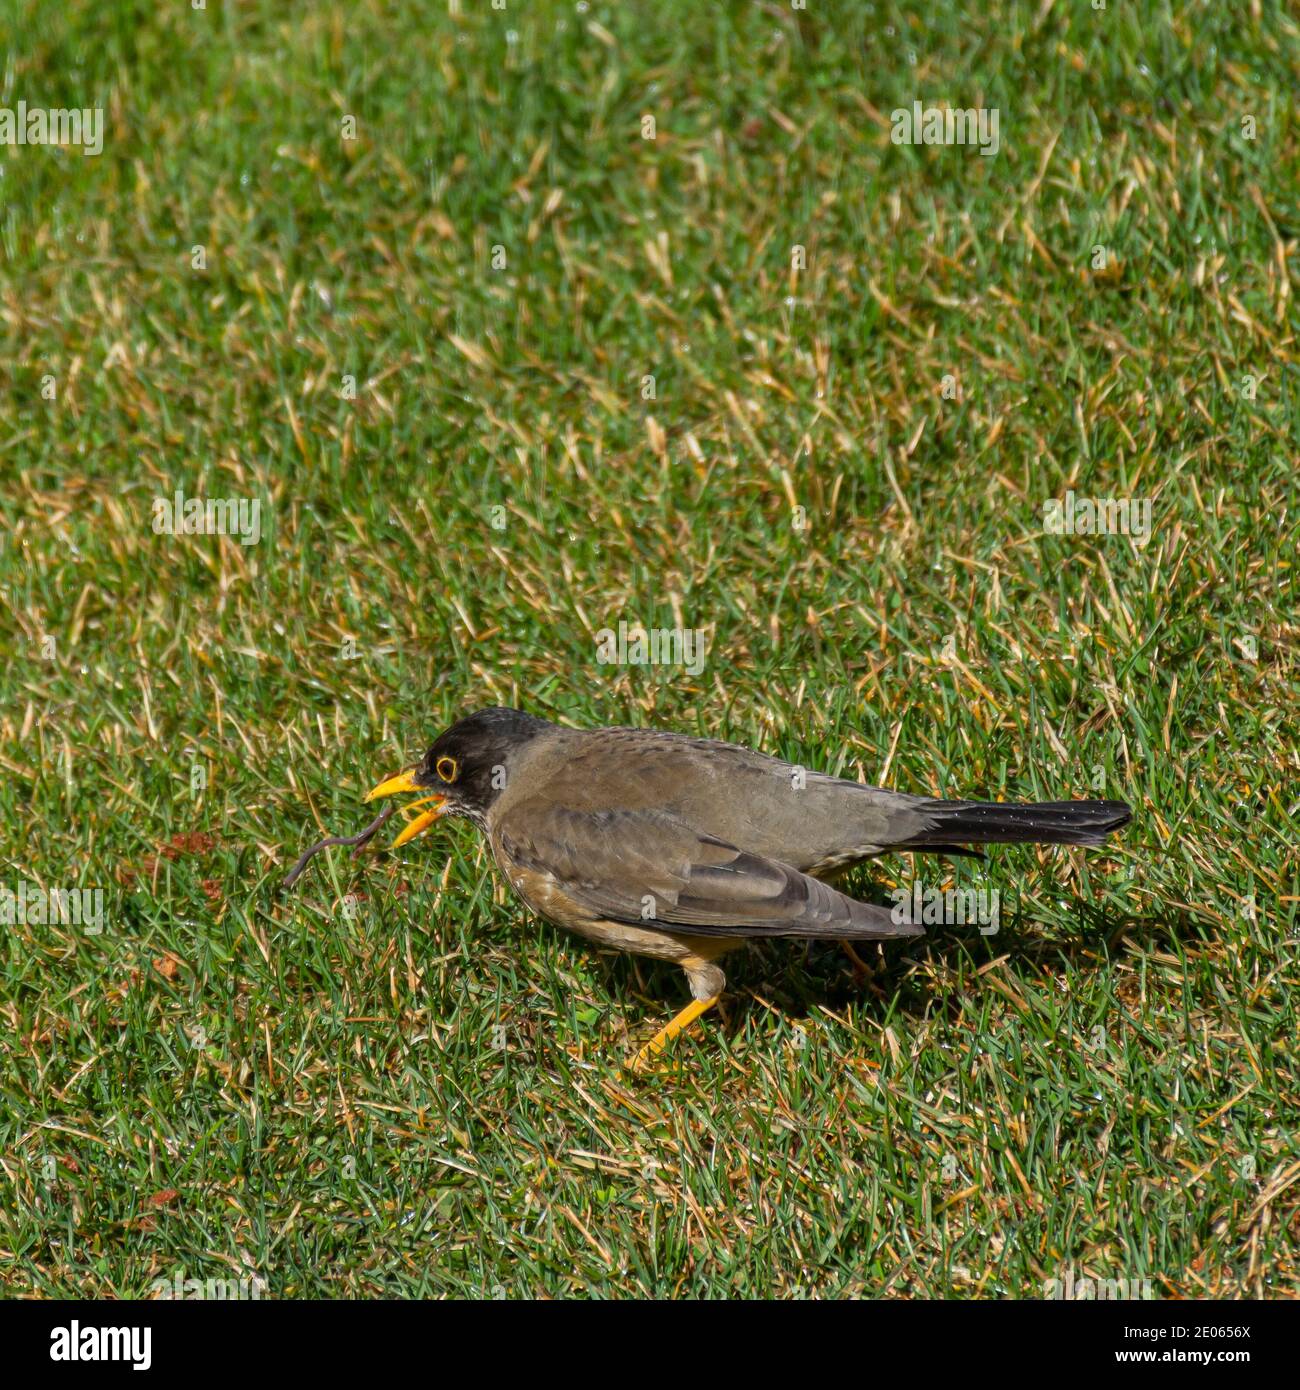 Clouse up view of Austral thrush (Turdus falcklandii) on a green grass in Patagonia, Argentina Stock Photo